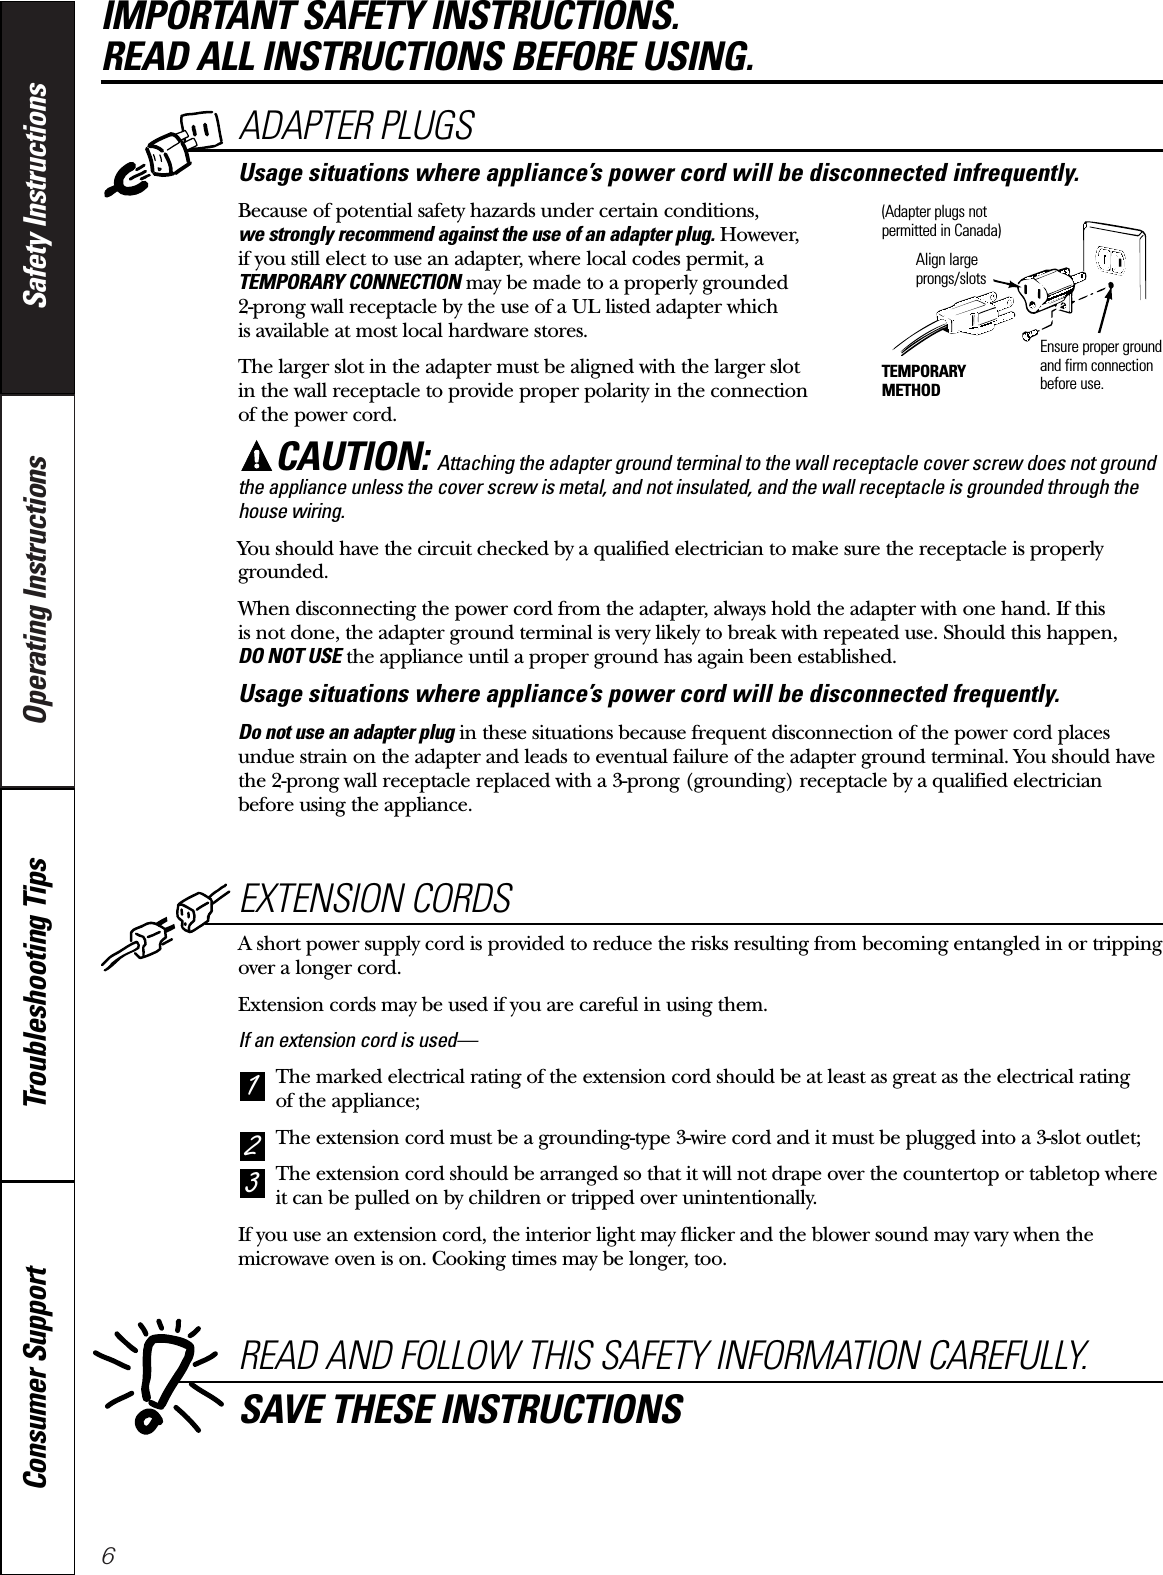 6Operating Instructions Safety InstructionsConsumer Support Troubleshooting TipsEXTENSION CORDSA short power supply cord is provided to reduce the risks resulting from becoming entangled in or trippingover a longer cord.Extension cords may be used if you are careful in using them.If an extension cord is used—The marked electrical rating of the extension cord should be at least as great as the electrical rating of the appliance;The extension cord must be a grounding-type 3-wire cord and it must be plugged into a 3-slot outlet;The extension cord should be arranged so that it will not drape over the countertop or tabletop whereit can be pulled on by children or tripped over unintentionally.If you use an extension cord, the interior light may flicker and the blower sound may vary when themicrowave oven is on. Cooking times may be longer, too.321READ AND FOLLOW THIS SAFETY INFORMATION CAREFULLY.SAVE THESE INSTRUCTIONSIMPORTANT SAFETY INSTRUCTIONS. READ ALL INSTRUCTIONS BEFORE USING.ADAPTER PLUGSUsage situations where appliance’s power cord will be disconnected infrequently.Because of potential safety hazards under certain conditions,we strongly recommend against the use of an adapter plug. However, if you still elect to use an adapter, where local codes permit, a TEMPORARY CONNECTION may be made to a properly grounded 2-prong wall receptacle by the use of a UL listed adapter which is available at most local hardware stores.The larger slot in the adapter must be aligned with the larger slot in the wall receptacle to provide proper polarity in the connection of the power cord.CAUTION: Attaching the adapter ground terminal to the wall receptacle cover screw does not groundthe appliance unless the cover screw is metal, and not insulated, and the wall receptacle is grounded through thehouse wiring. You should have the circuit checked by a qualified electrician to make sure the receptacle is properlygrounded.When disconnecting the power cord from the adapter, always hold the adapter with one hand. If this is not done, the adapter ground terminal is very likely to break with repeated use. Should this happen, DO NOT USE the appliance until a proper ground has again been established.Usage situations where appliance’s power cord will be disconnected frequently.Do not use an adapter plug in these situations because frequent disconnection of the power cord placesundue strain on the adapter and leads to eventual failure of the adapter ground terminal. You should havethe 2-prong wall receptacle replaced with a 3-prong (grounding) receptacle by a qualified electricianbefore using the appliance.Ensure proper groundand firm connectionbefore use.TEMPORARYMETHODAlign largeprongs/slots(Adapter plugs notpermitted in Canada)